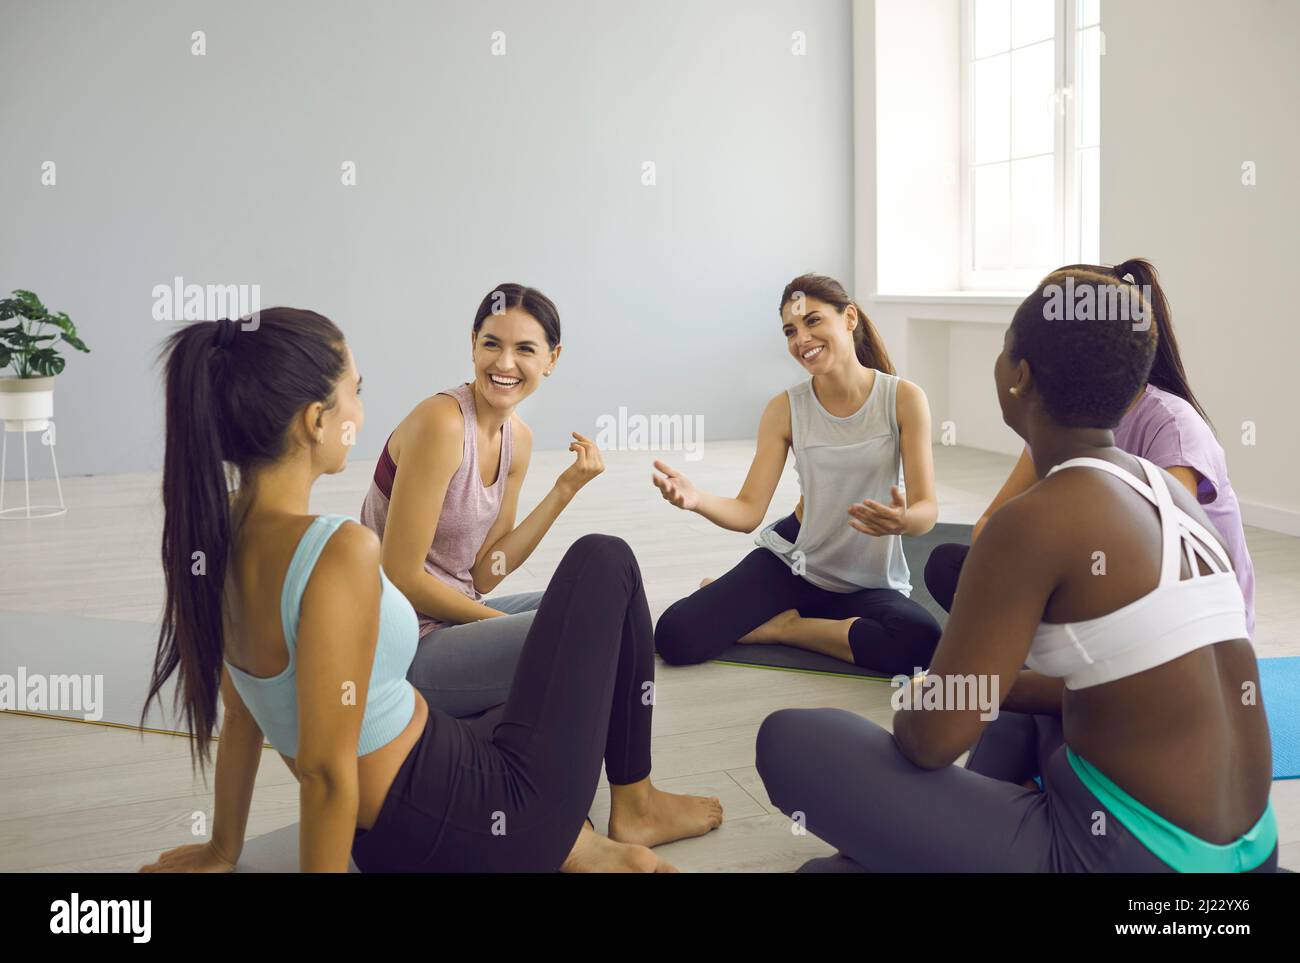 Senior Women Exercise Laughing Cool Urban Workout Equipment Friends Fun  Stock Photo by ©PeopleImages.com 670433868